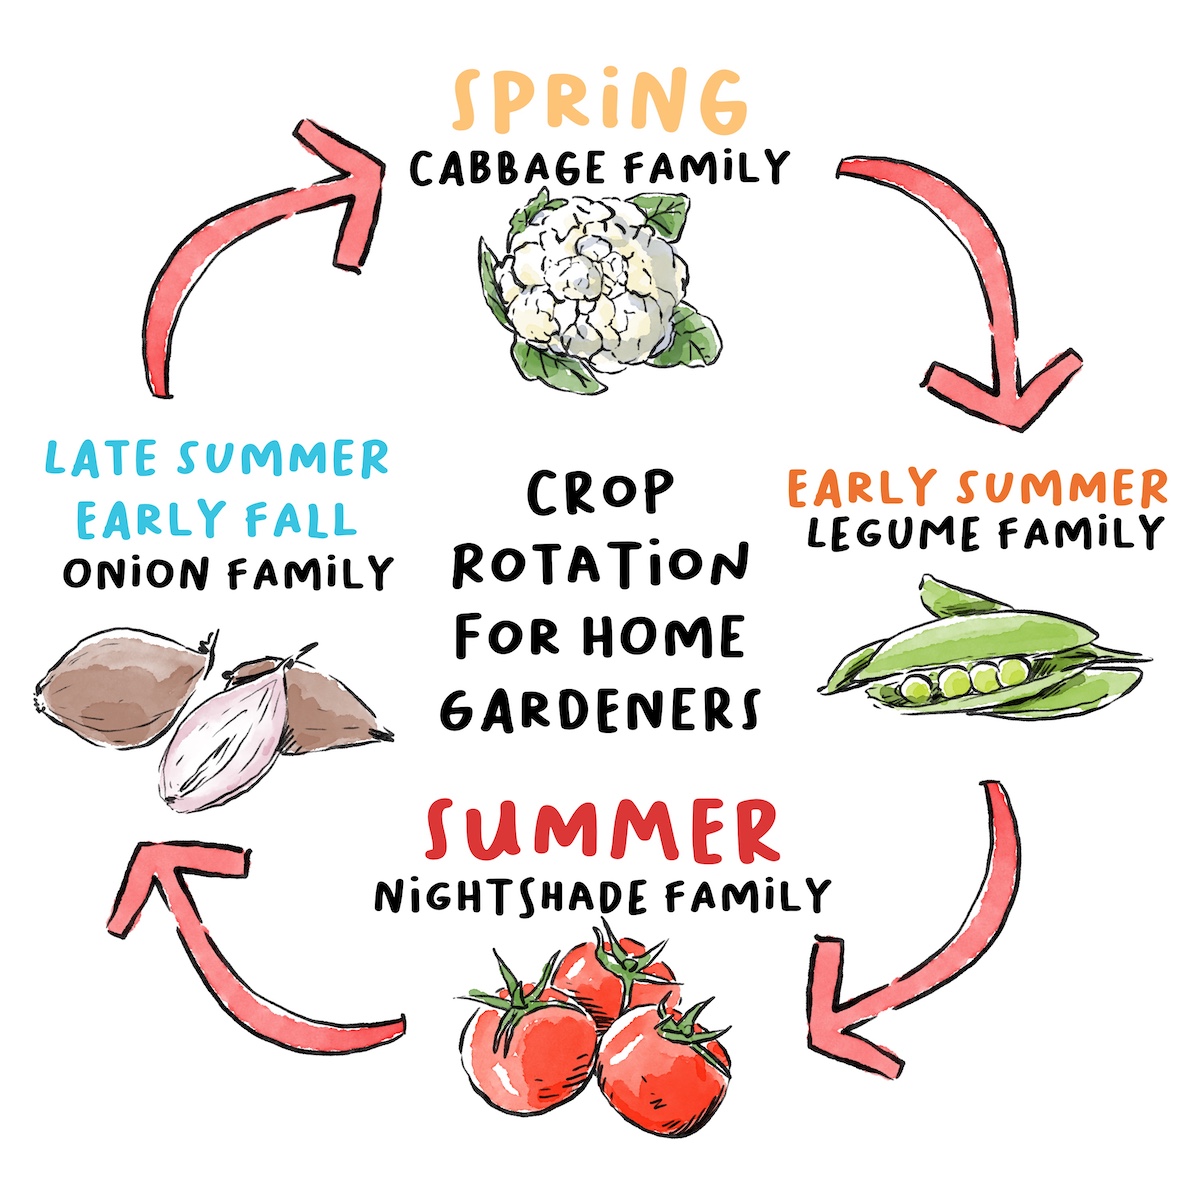 An illustrated diagram explaining vegetable crop rotation for each season: cabbage family in spring, legume family in early summer, nightshade family in summer, and onion family in late summer and early fall.